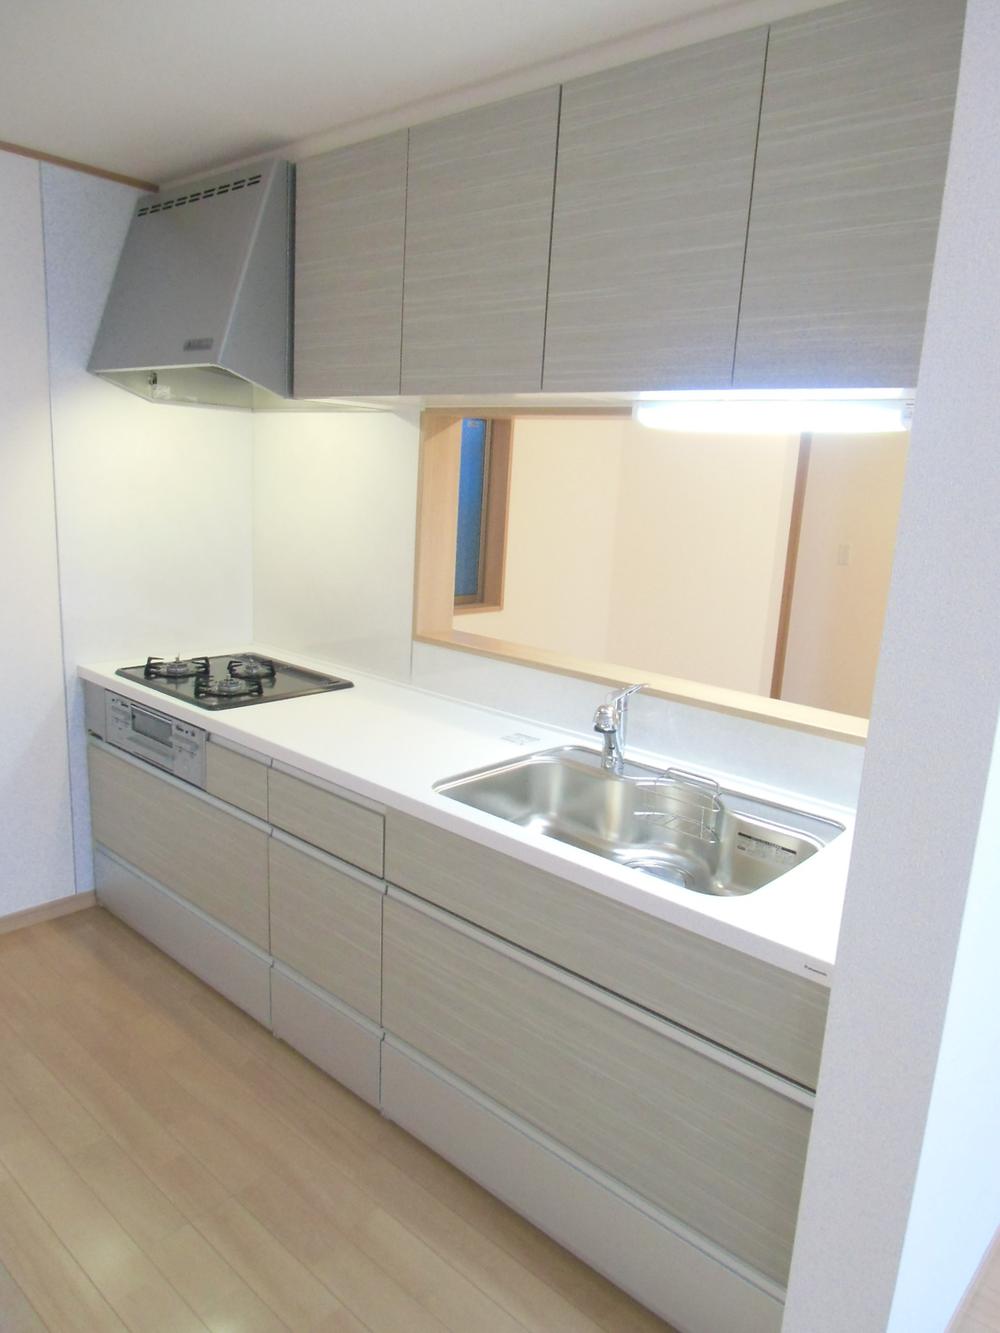 Kitchen. Adopt the artificial marble counter to slide cabinet